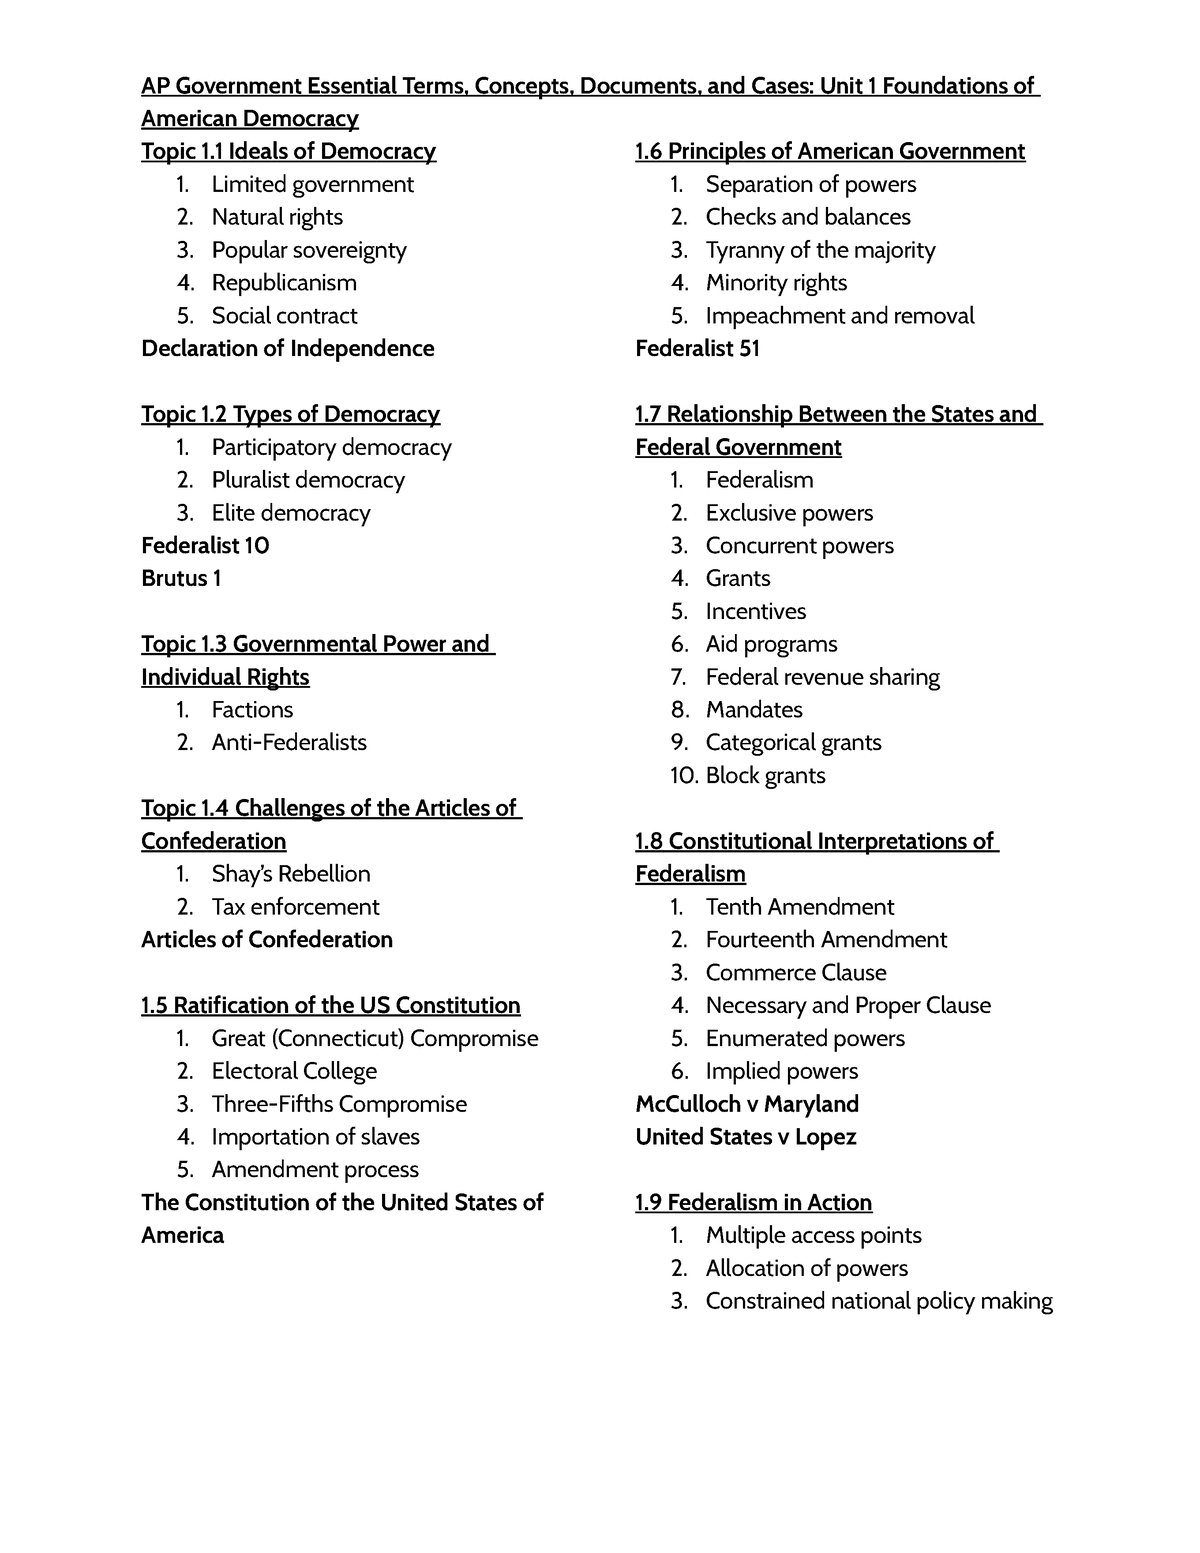 AP Government Essential Terms and Concepts Unit 1 AP Government